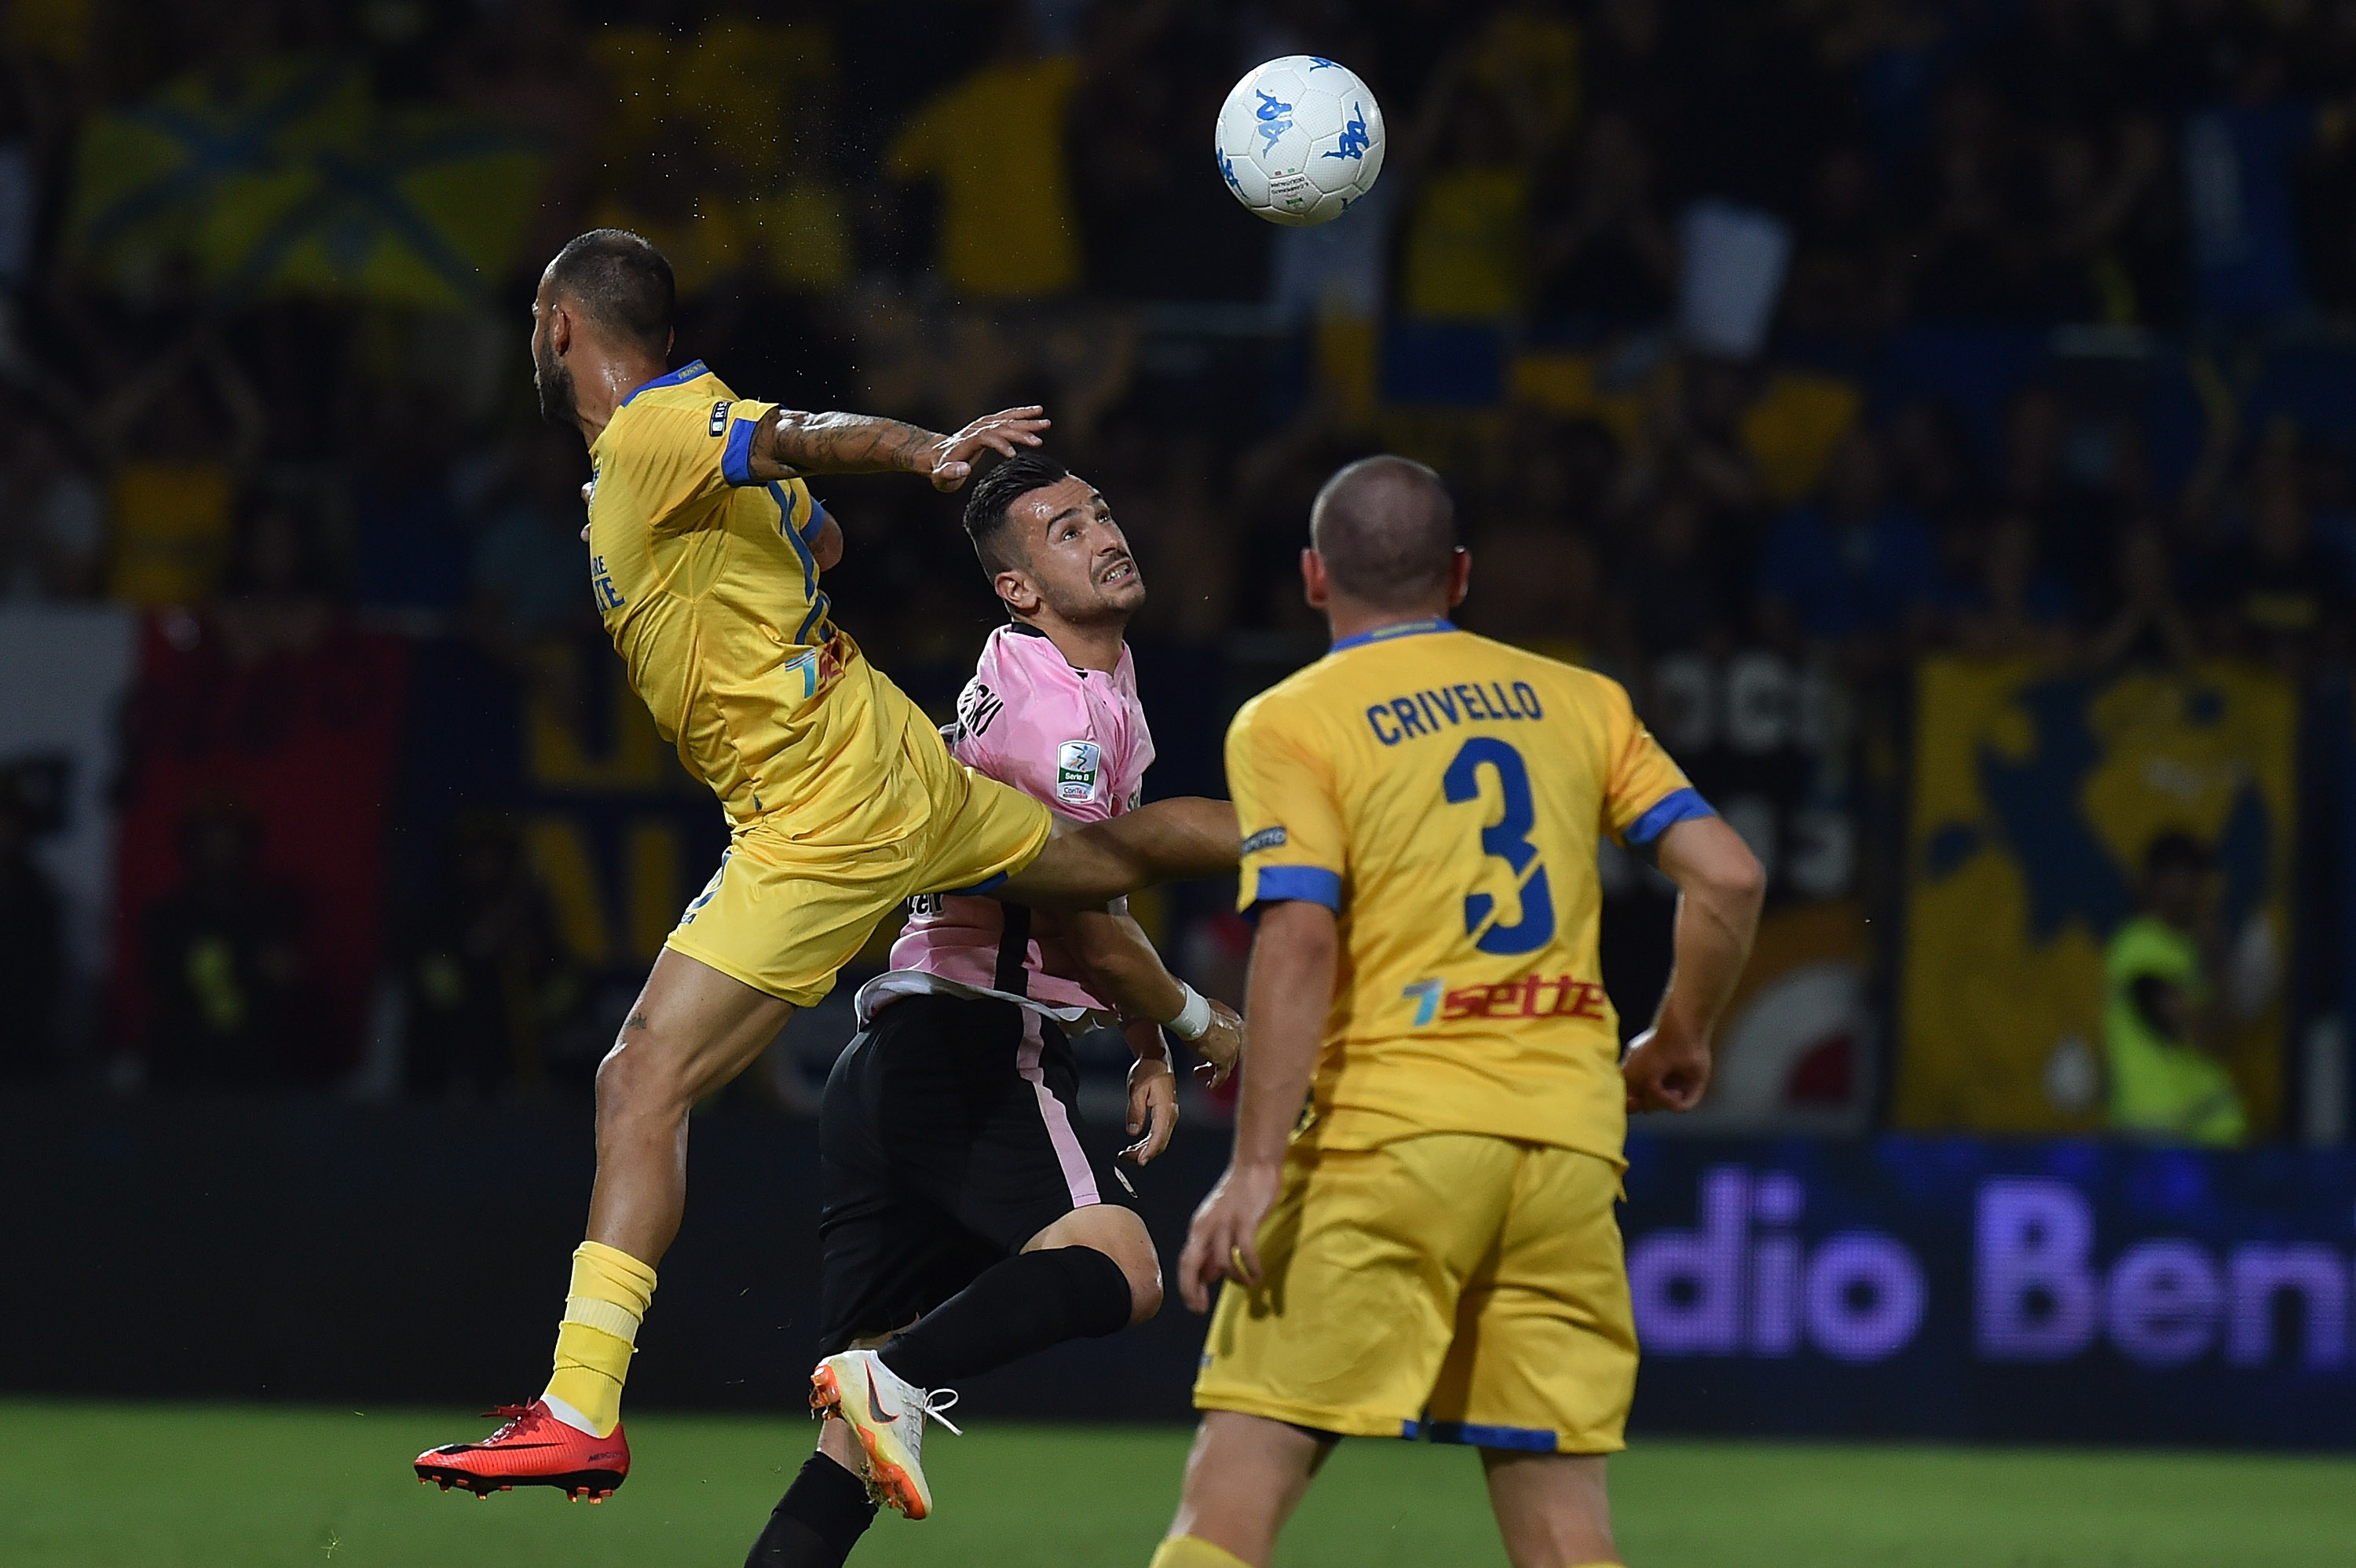 FROSINONE, ITALY - JUNE 16: Ilija Nestorowski (C) of Palermo is challenged by Federico Dionisi (L) during the serie B playoff match final between Frosinone Calcio v US Citta di Palermo at Stadio Benito Stirpe on June 16, 2018 in Frosinone, Italy.  (Photo by Tullio M. Puglia/Getty Images)